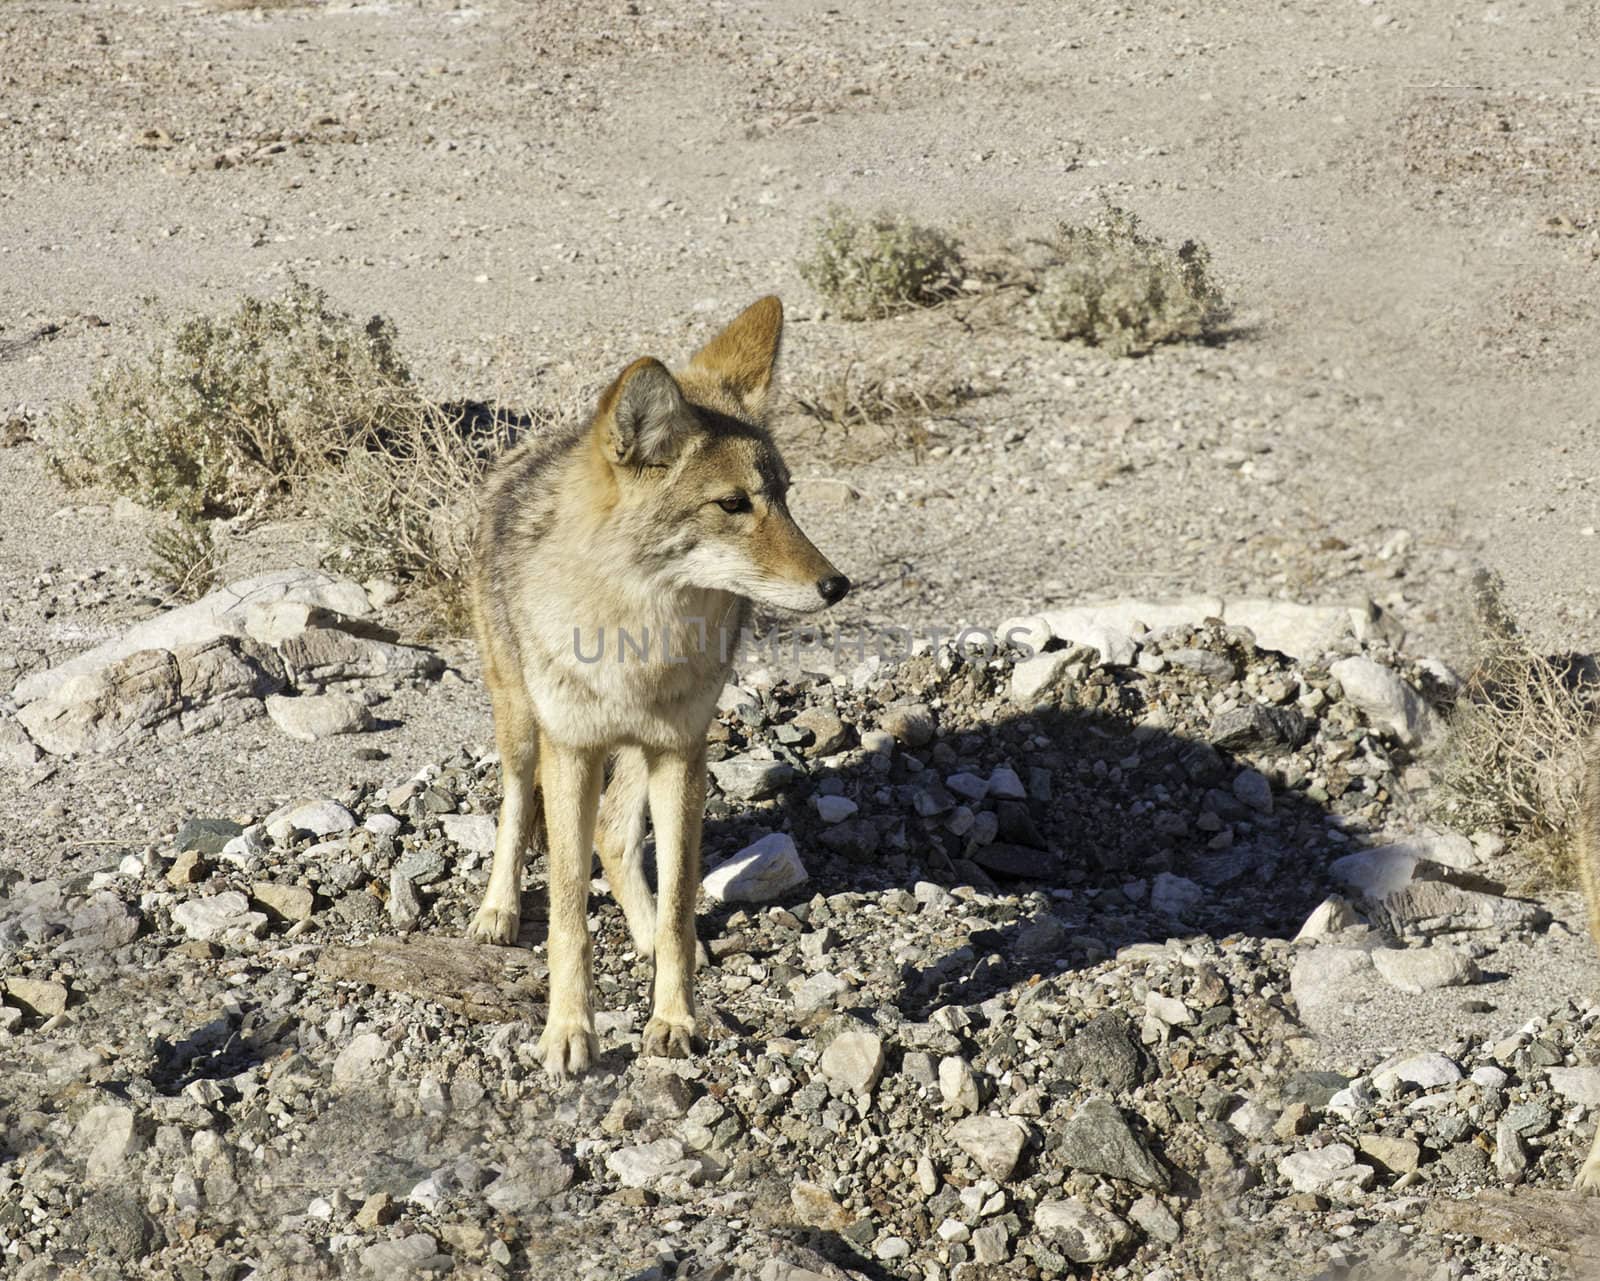 coyote (canis latrans) in Death Valley